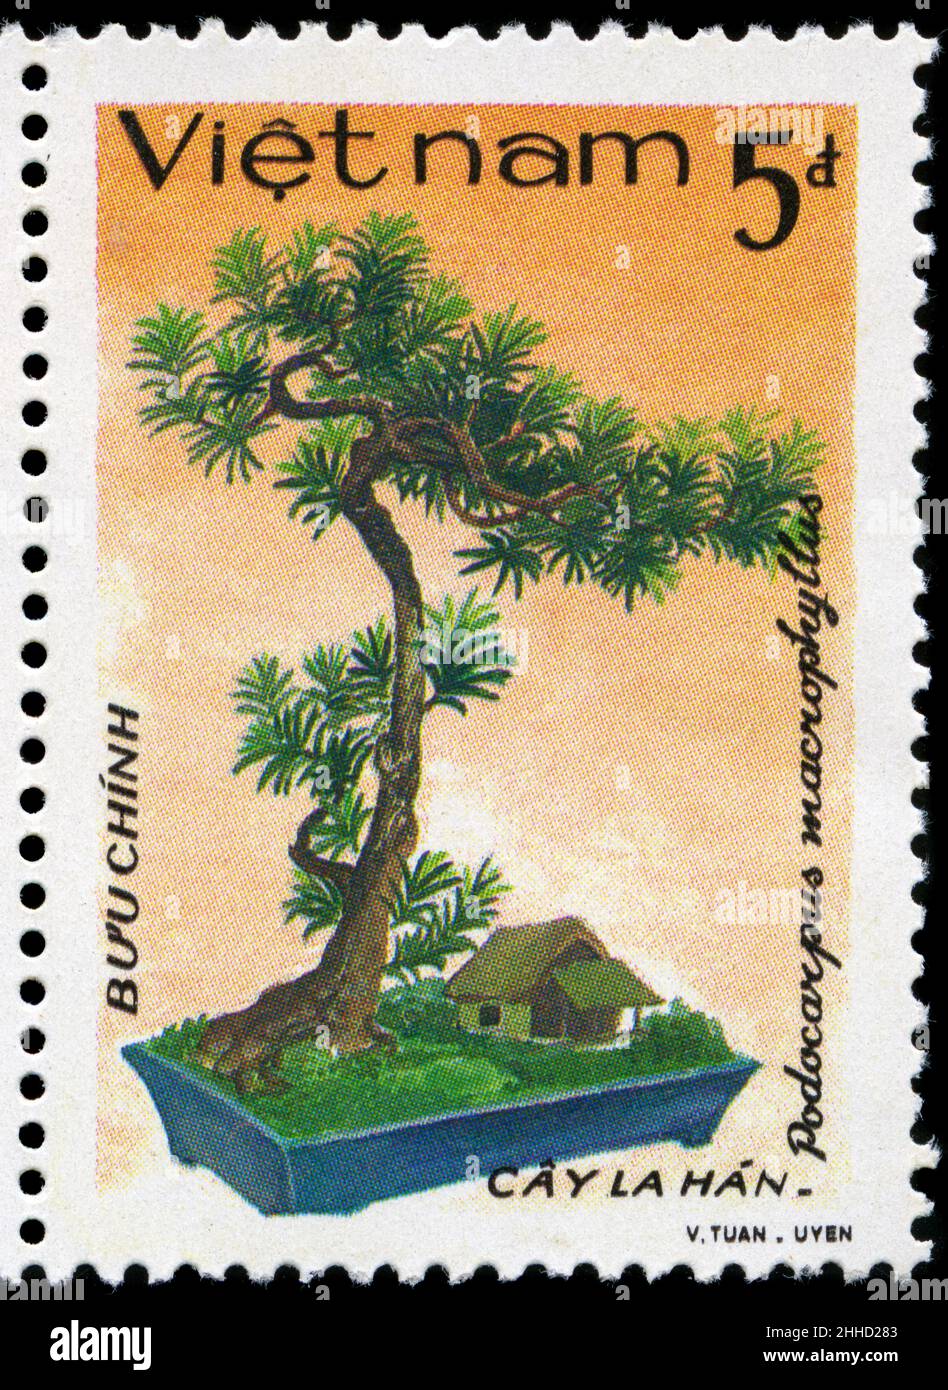 Postage stamp from Vietnam in the Vietnamese Bonsai series issued in 1986 Stock Photo